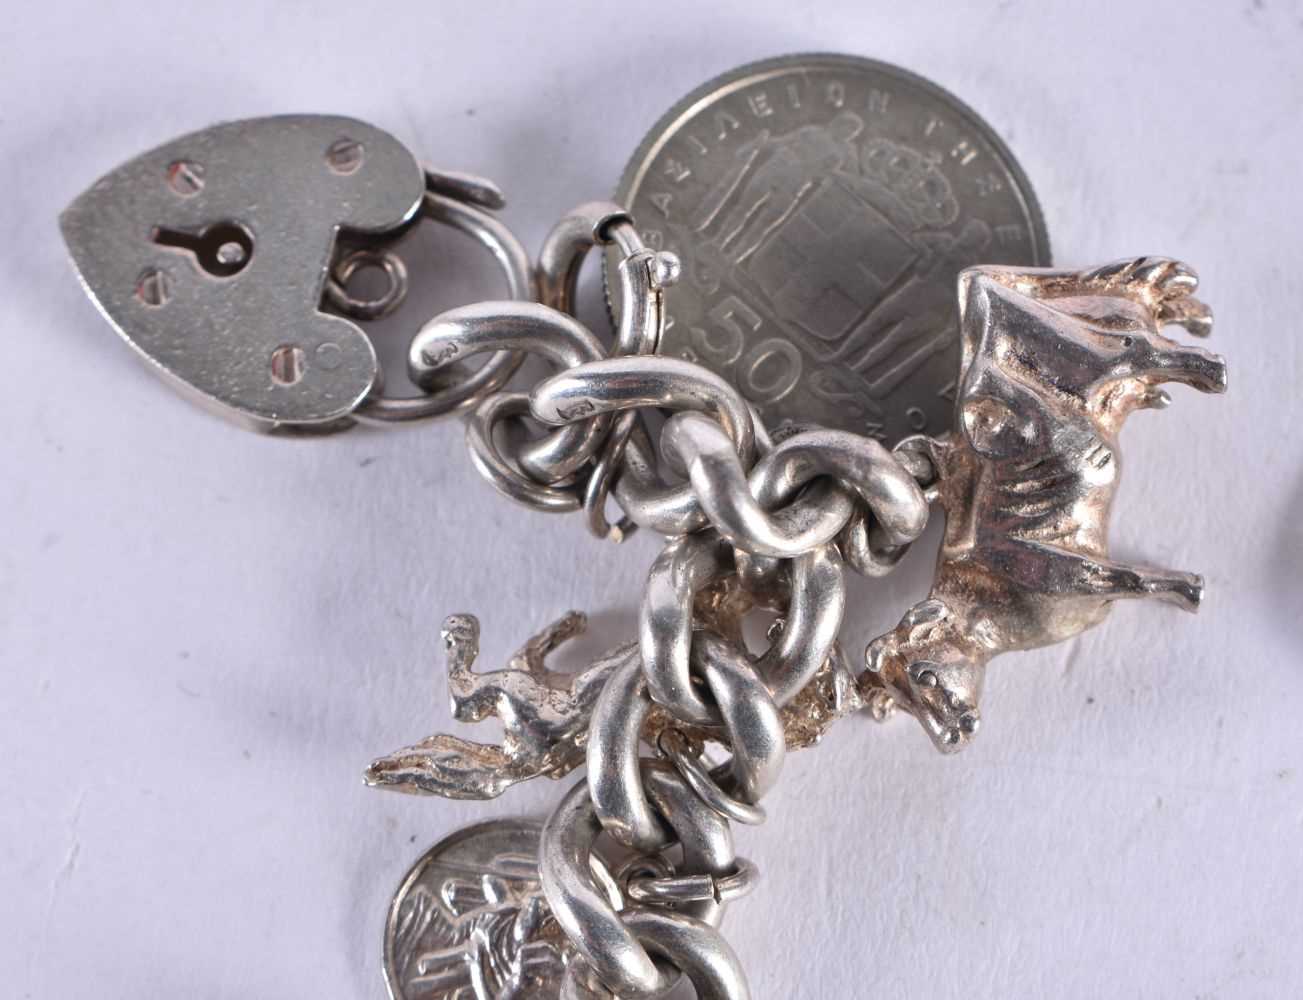 A SILVER CHARM BACELET. 74.6 grams. 20 cm wide. - Image 3 of 5